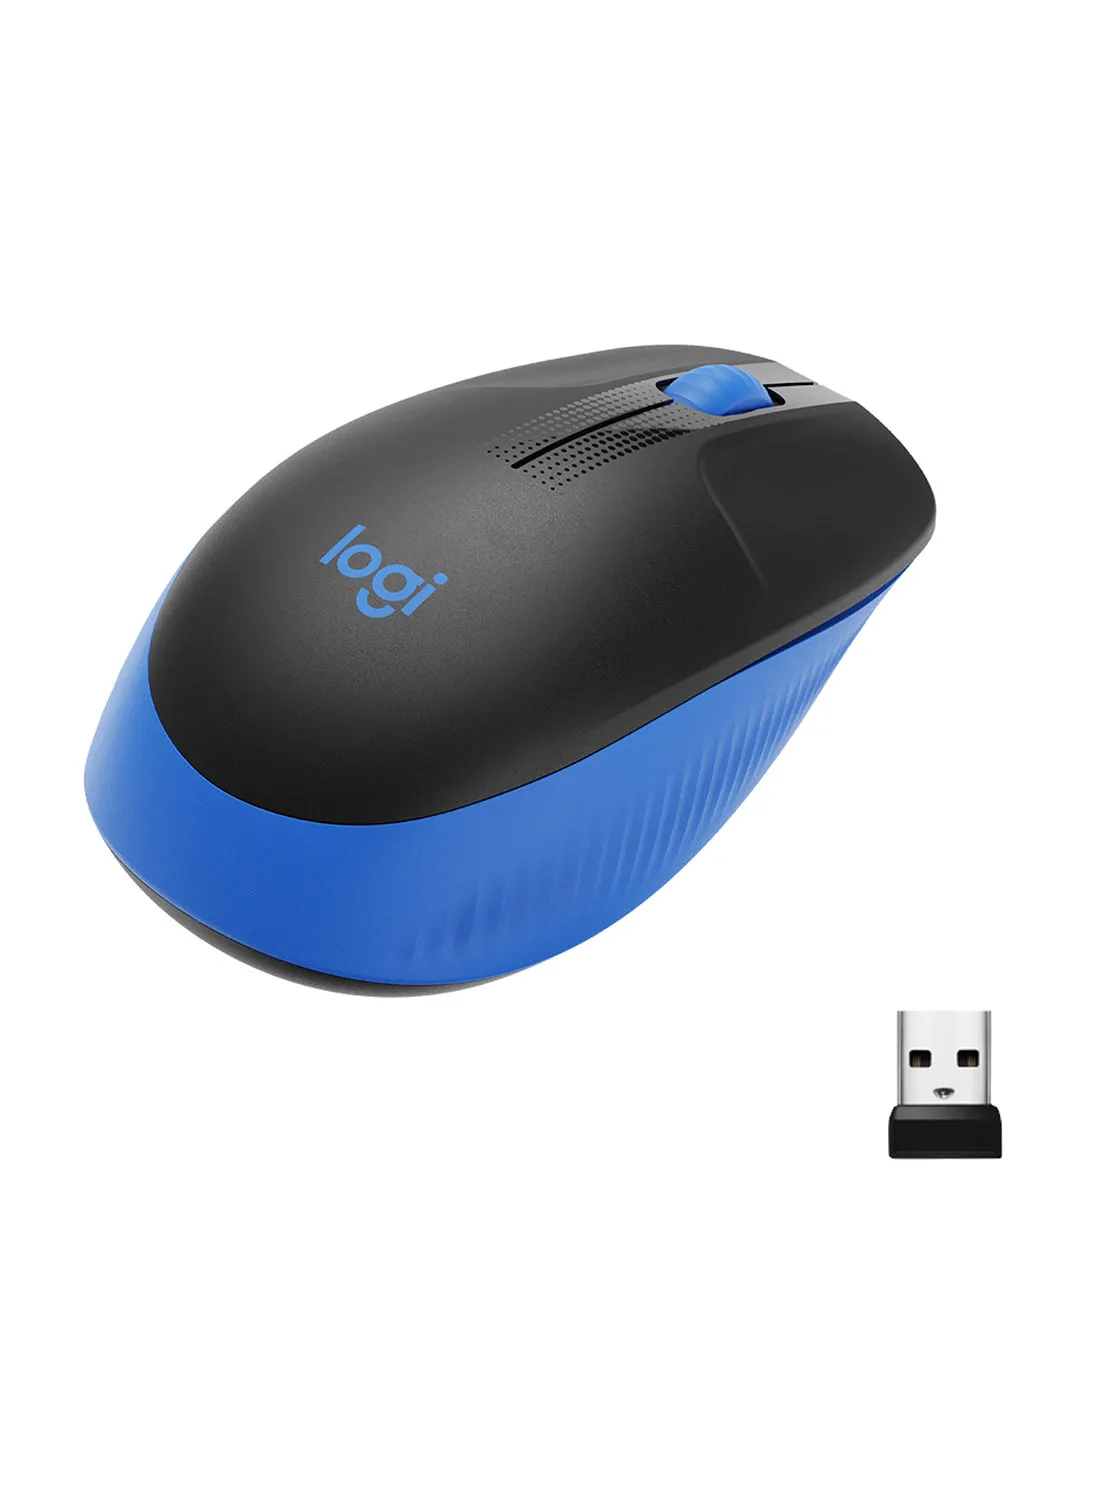 Logitech Wireless Mouse M190, Full Size Ambidextrous Curve Design, 18-Month Battery With Power Saving Mode, USB Receiver, Precise Cursor Control Blue/Black